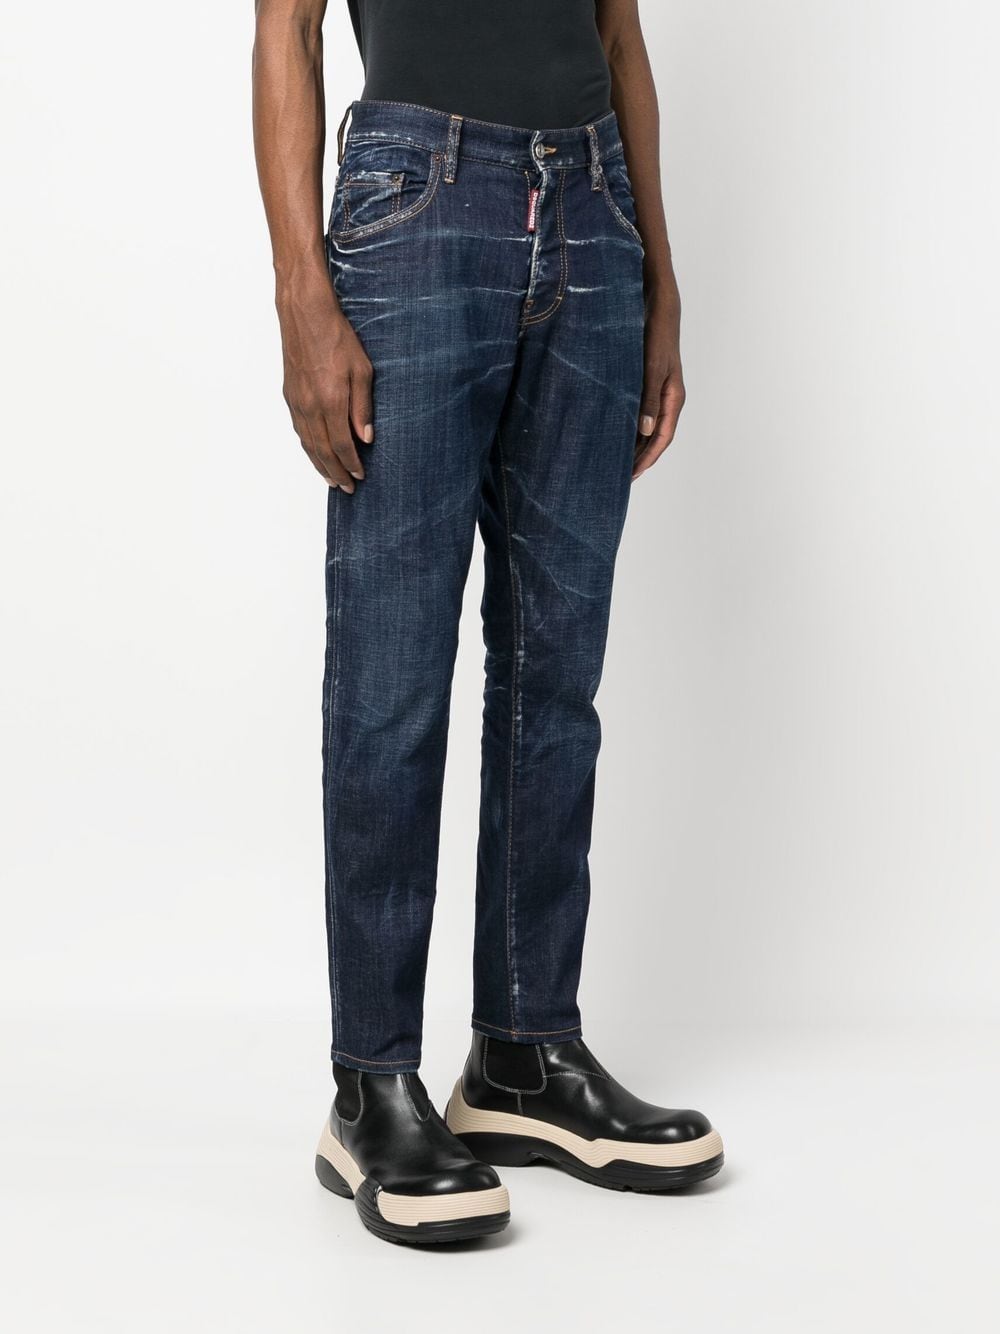 DSQUARED2 Bleached Skinny Jeans for Men - FW24 Collection